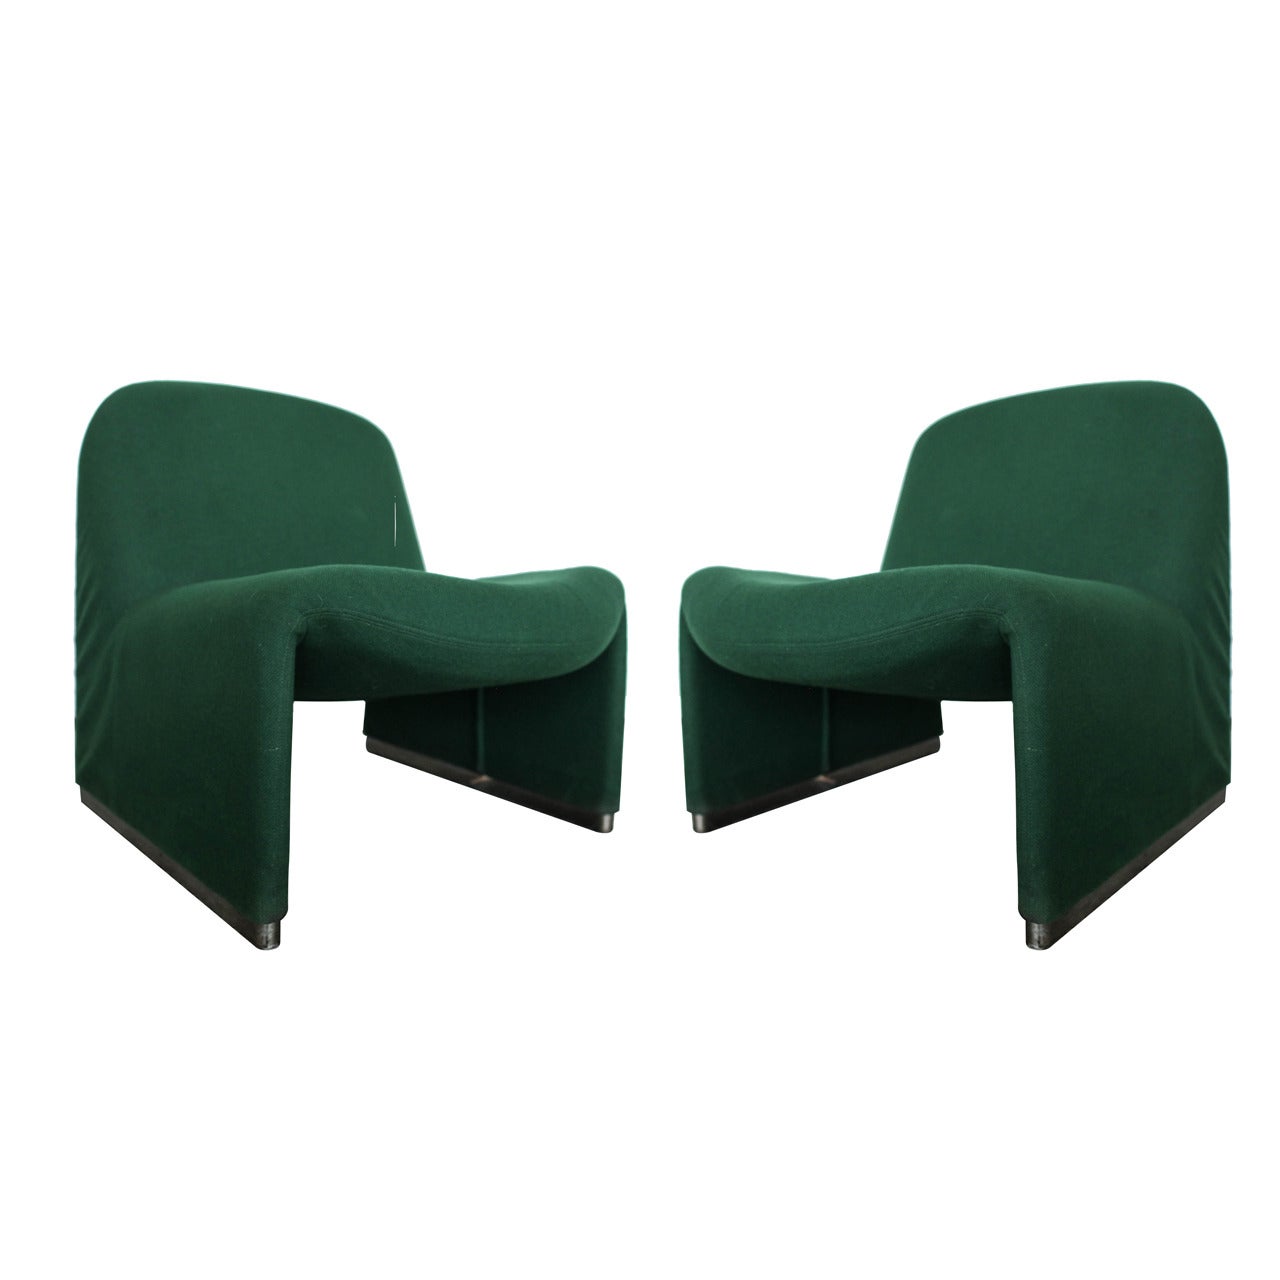 Two Green "Alky" Chairs by Giancarlo Piretti for Castelli